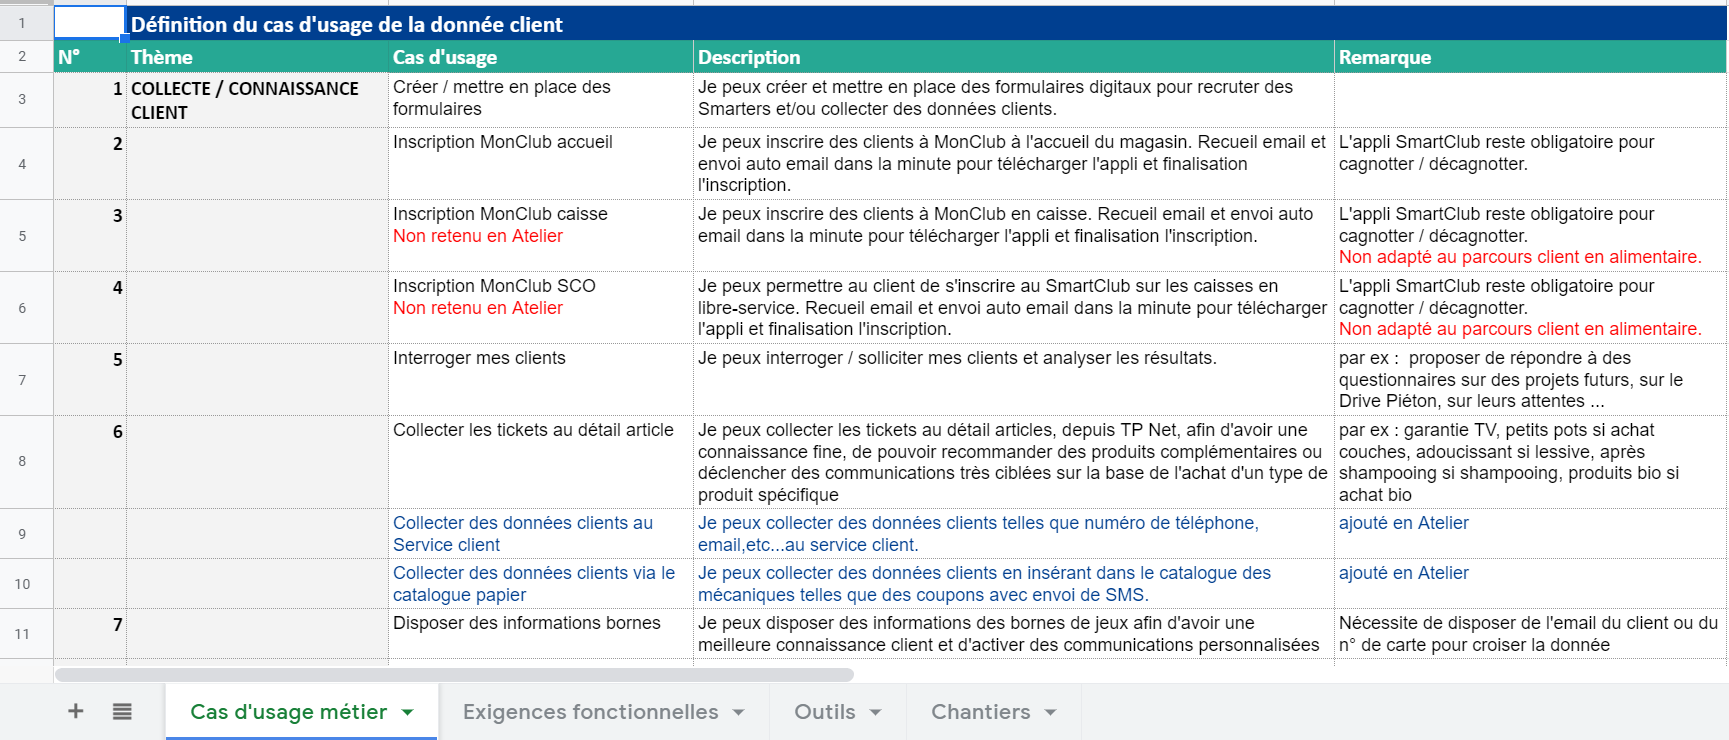 amoa crm marketing cas usages metiers